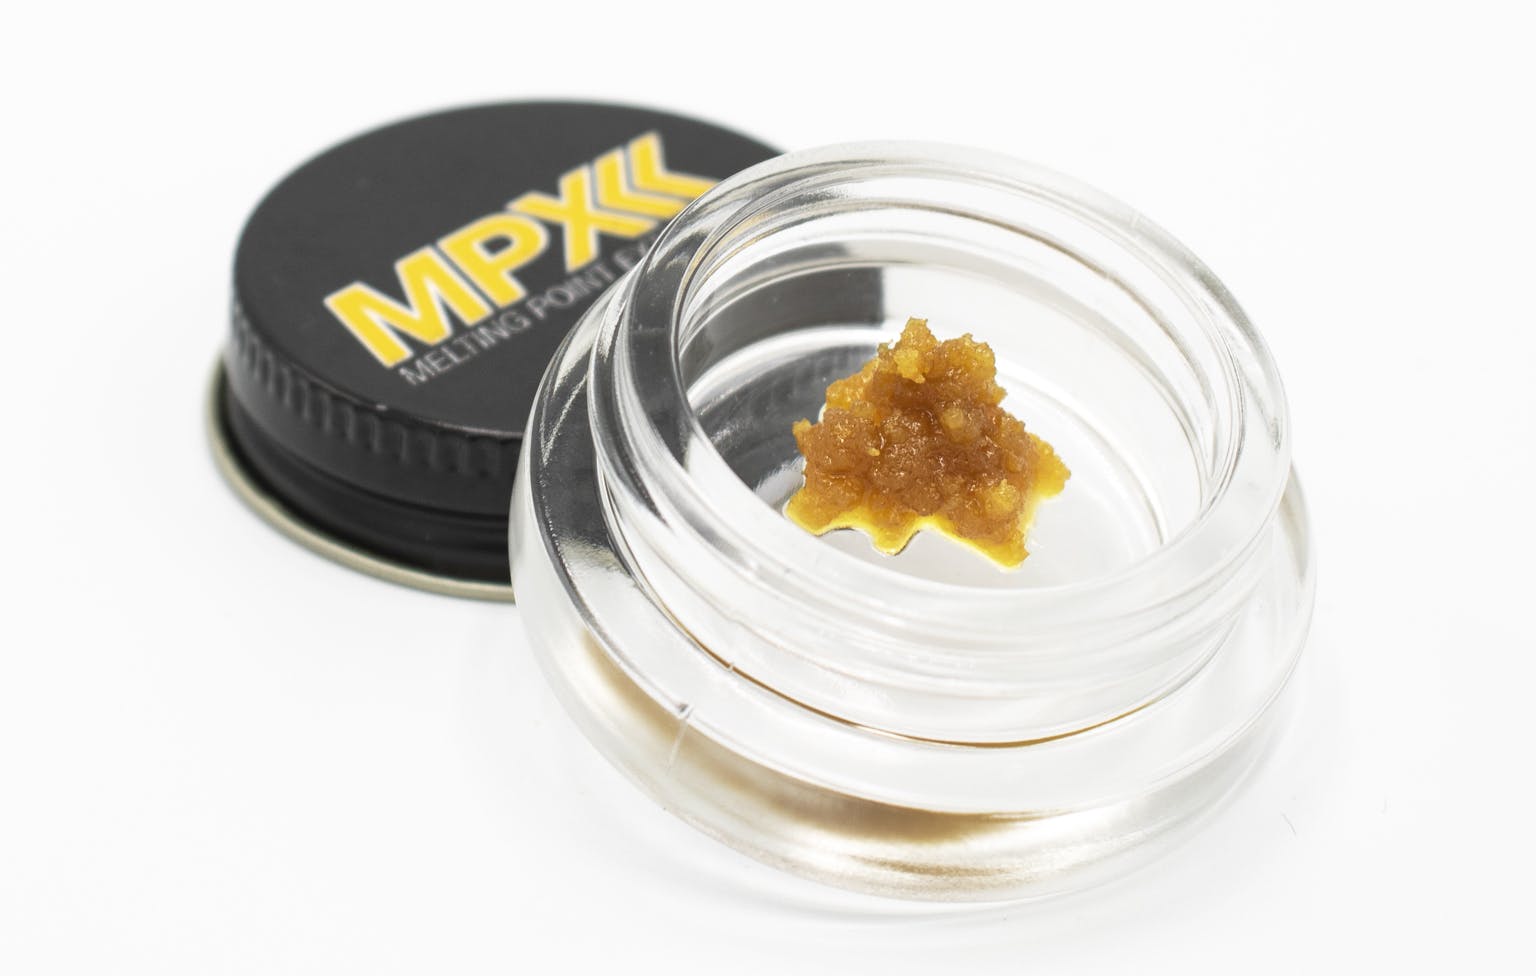 concentrate-tangie-stardawg-cr-cake-batter-5g-mpx